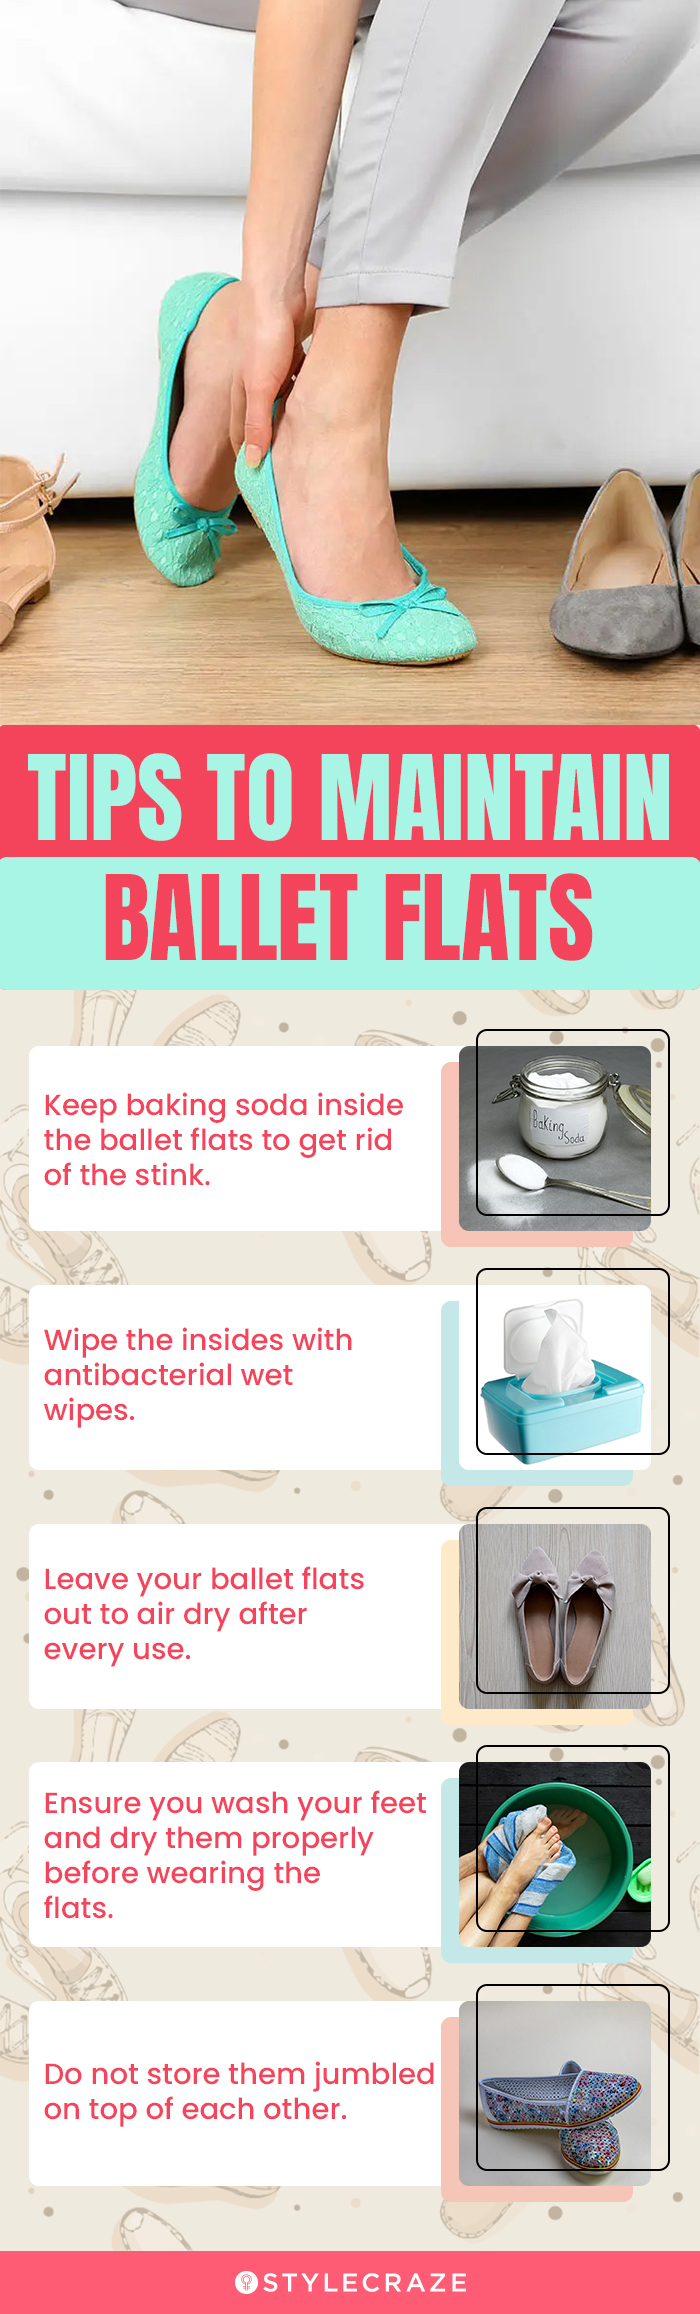 Tips To Maintain Ballet Flats (infographic)